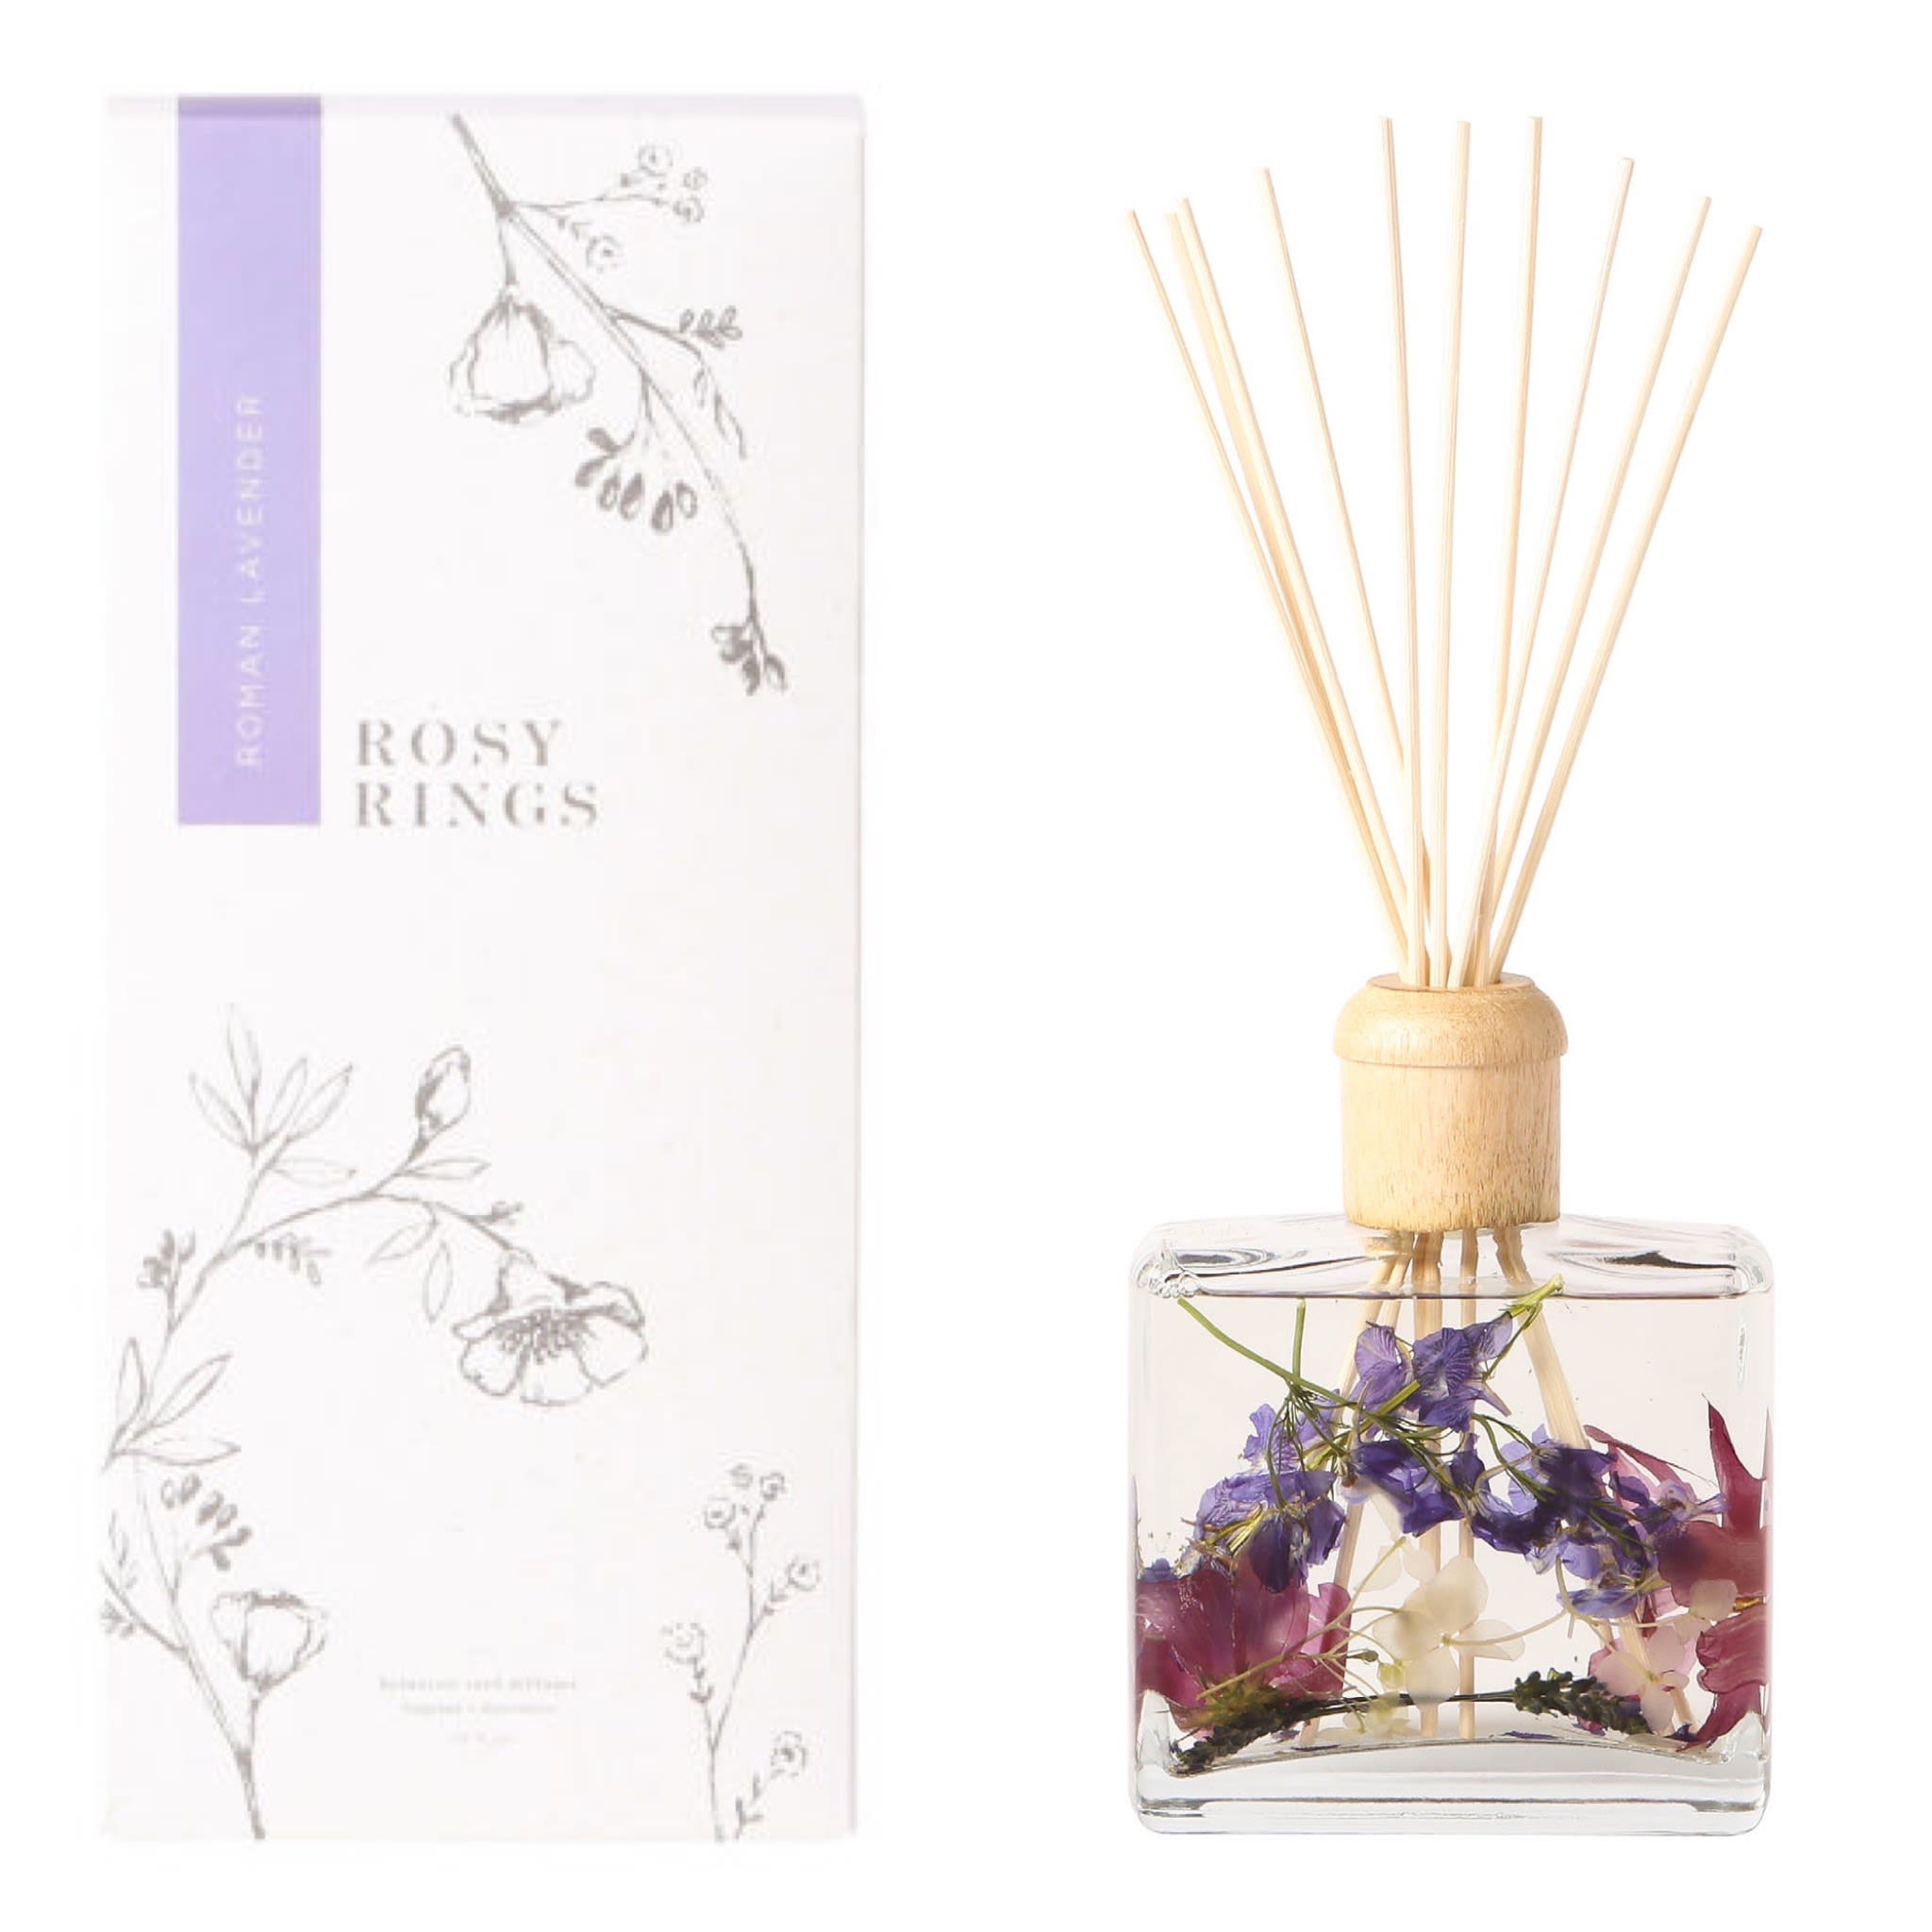 Rosy Rings Roman Lavender Botanical Reed Diffuser - Crisp bergamot and eucalyptus open the door to an elegant blend of true lavender with vanilla. 13 oz./Lasts 6-12 months avg. Gorgeous packaging is the perfect complement to dramatic square bottles filled with real spices, fruit and botanicals. Every natural element you see inside the glass vessel is delicately placed there by hand. Lovingly packaged with a wooden cap + 10 reed sticks.